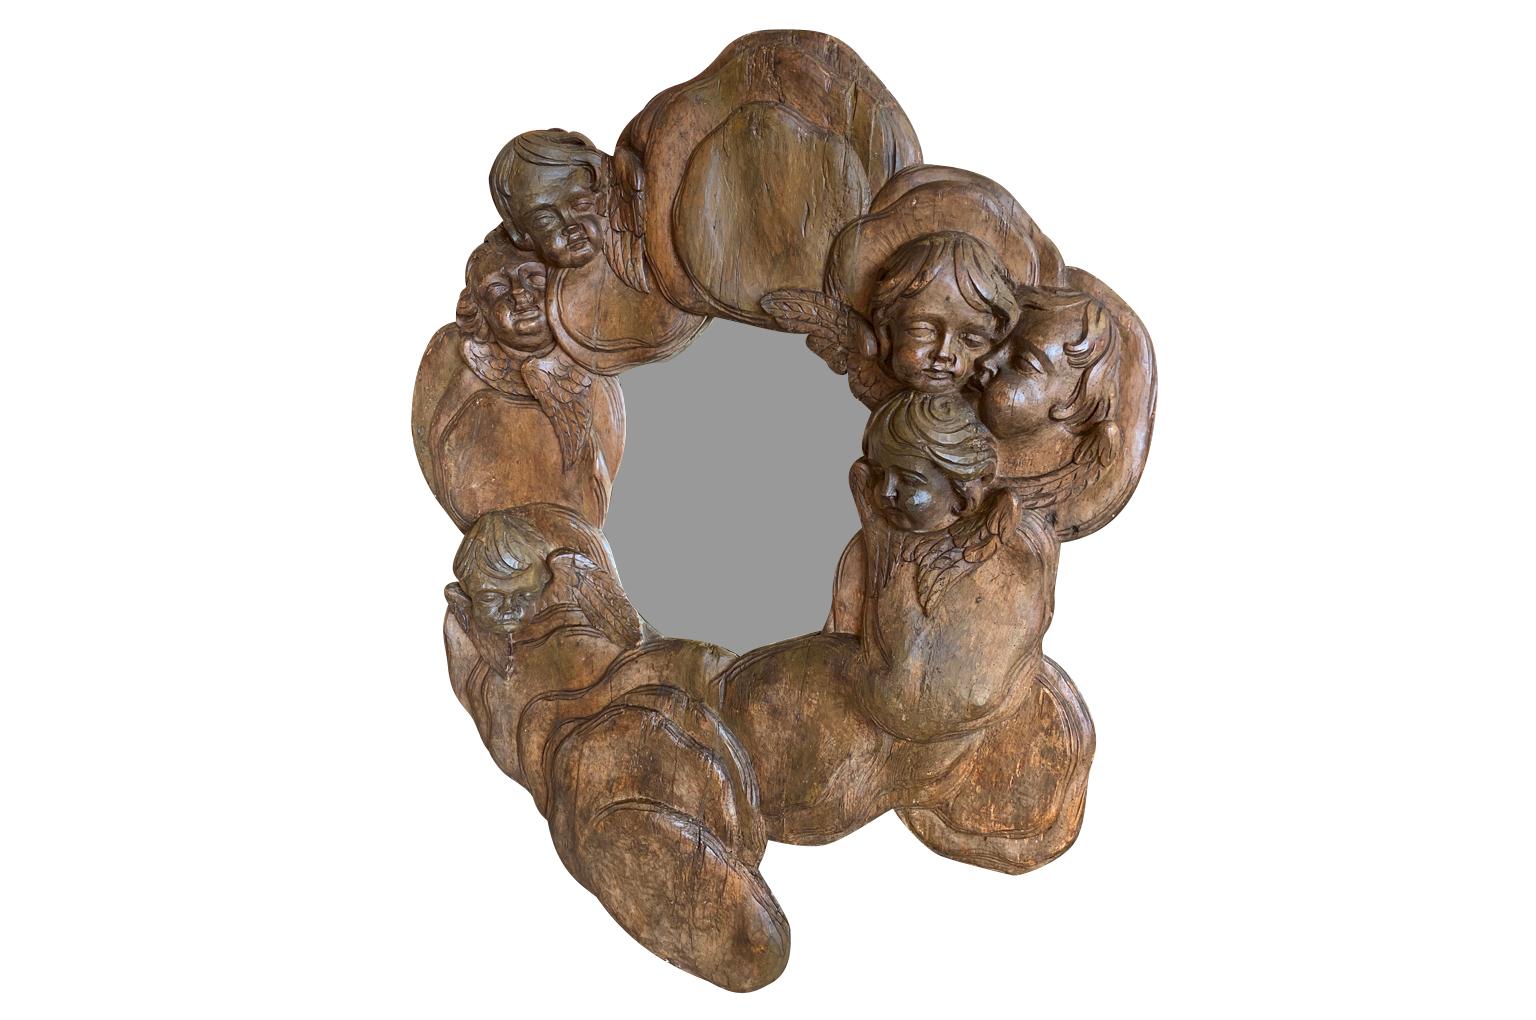 An exquisite 17th century Venetian Looking Glass - Mirror.  Masterly crafted in beautiful walnut with wonderful putti heads and clouds.  This mirror will be the star of its surroundings. 